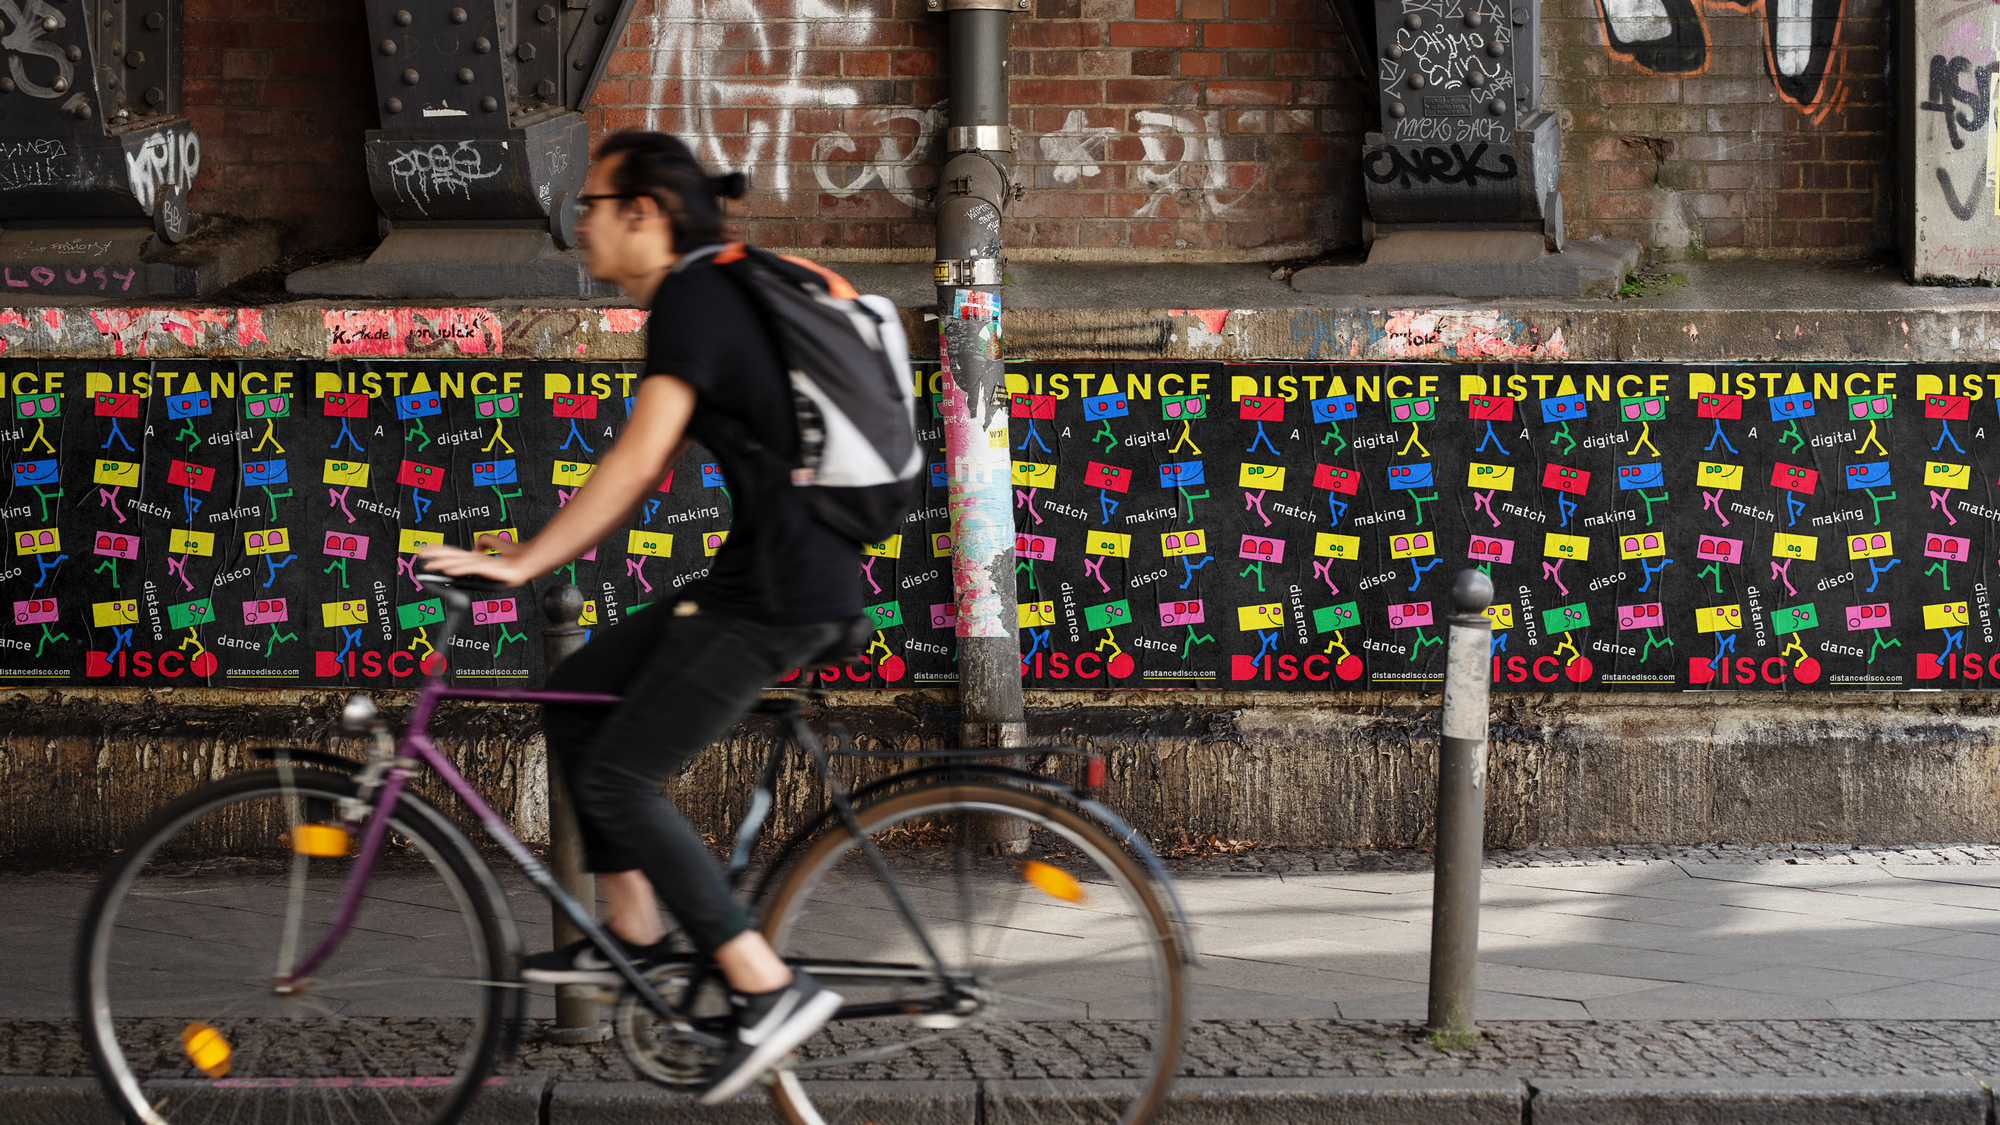 New Logo and Identity for Distance Disco by NIT